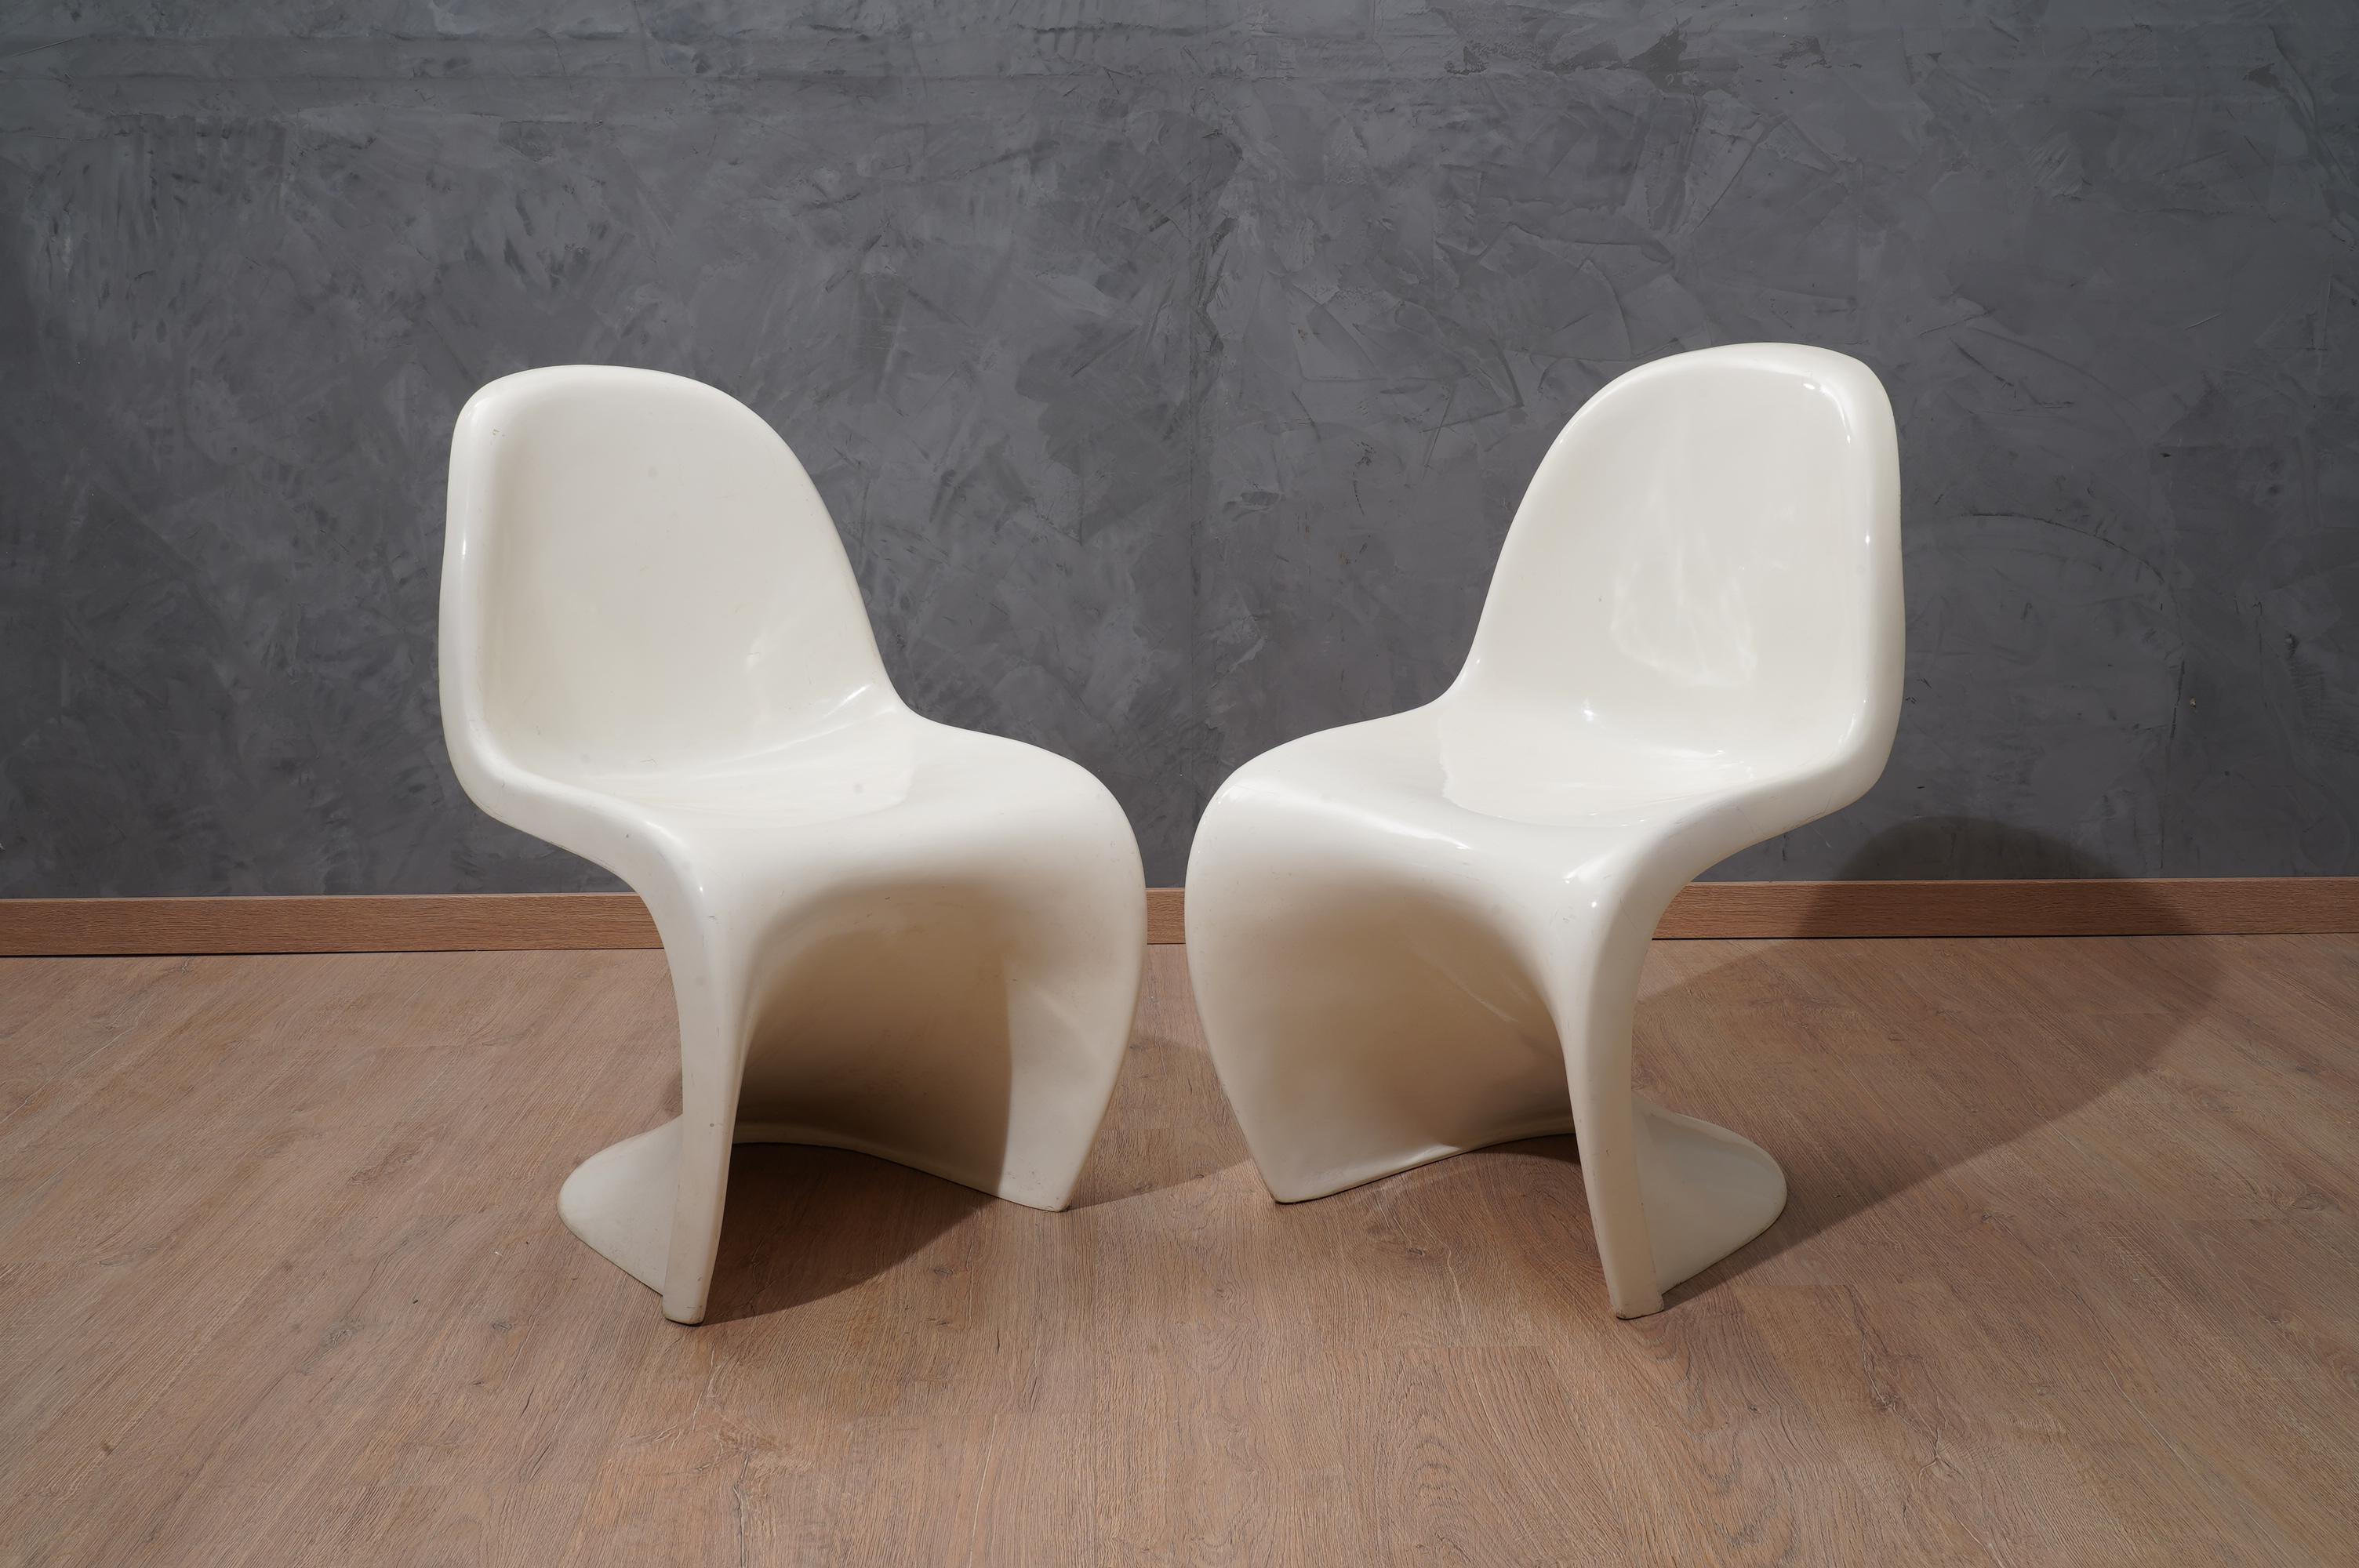 Four classic and original chairs from the Verner Panton line, with a strong white color, perfect and with very few traces of use. Comfortable and original for your cozy home they will make a great impression around your beautiful table, both in the